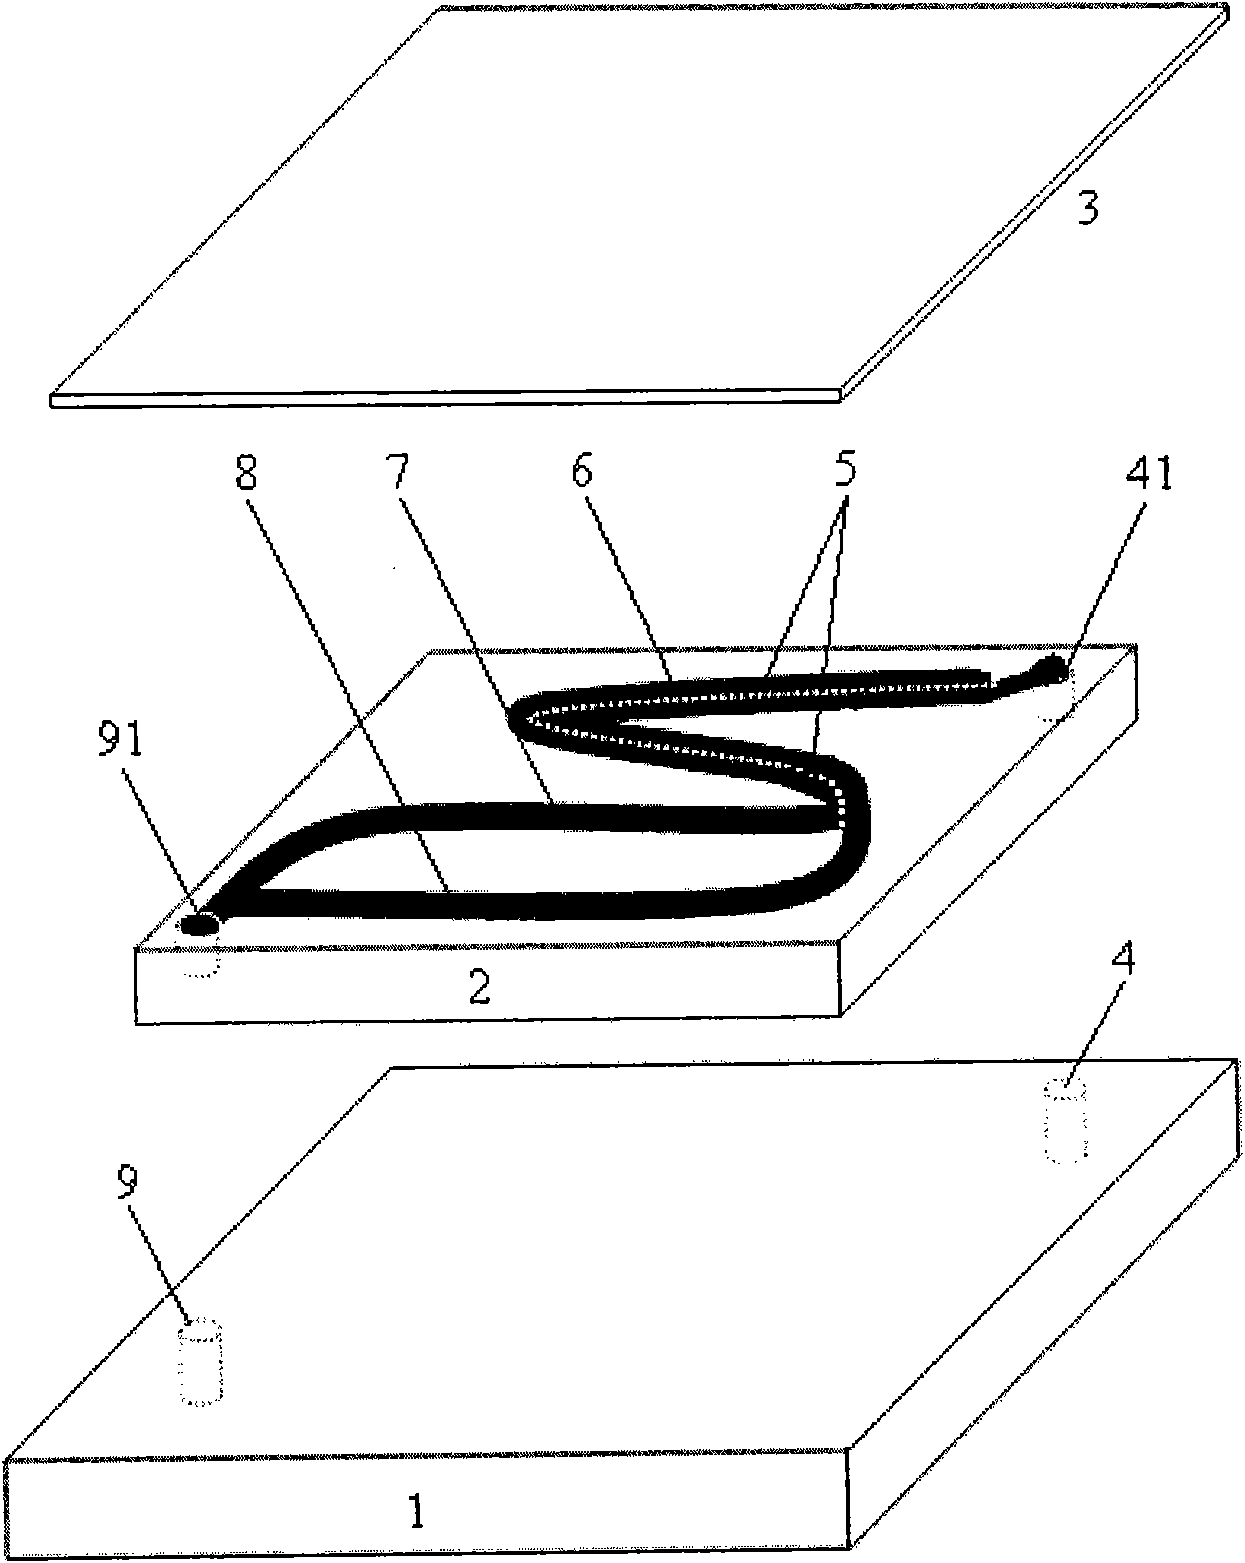 Integrated microfluidic sensing chip and method for detecting microfluid